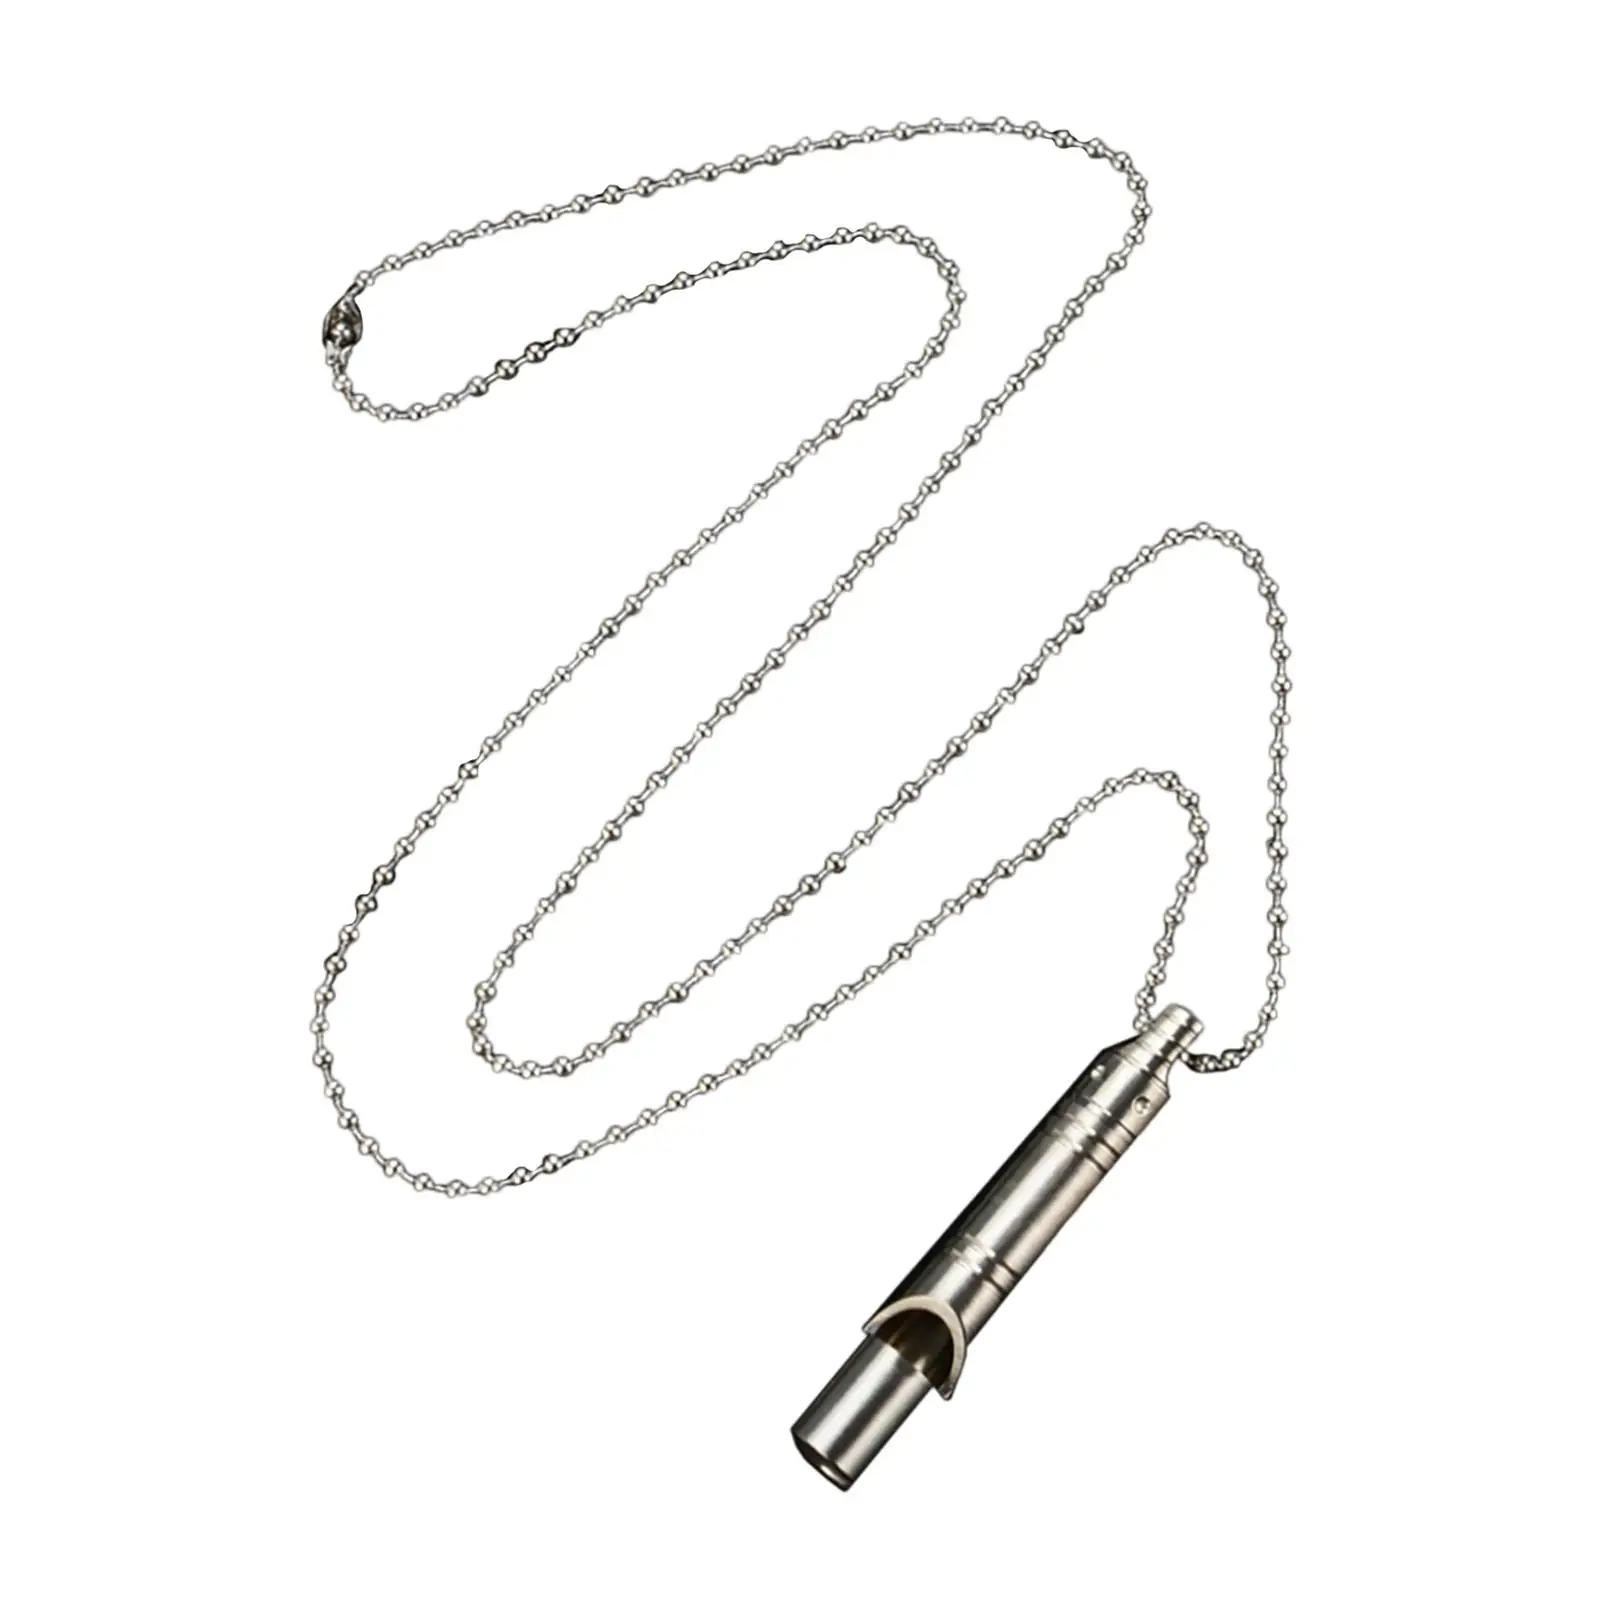 Survival Whistle Stainless Steel Chain Pet Training Outdoor Necklace Whistle for Outdoor Fishing Hiking Emergency Hunting